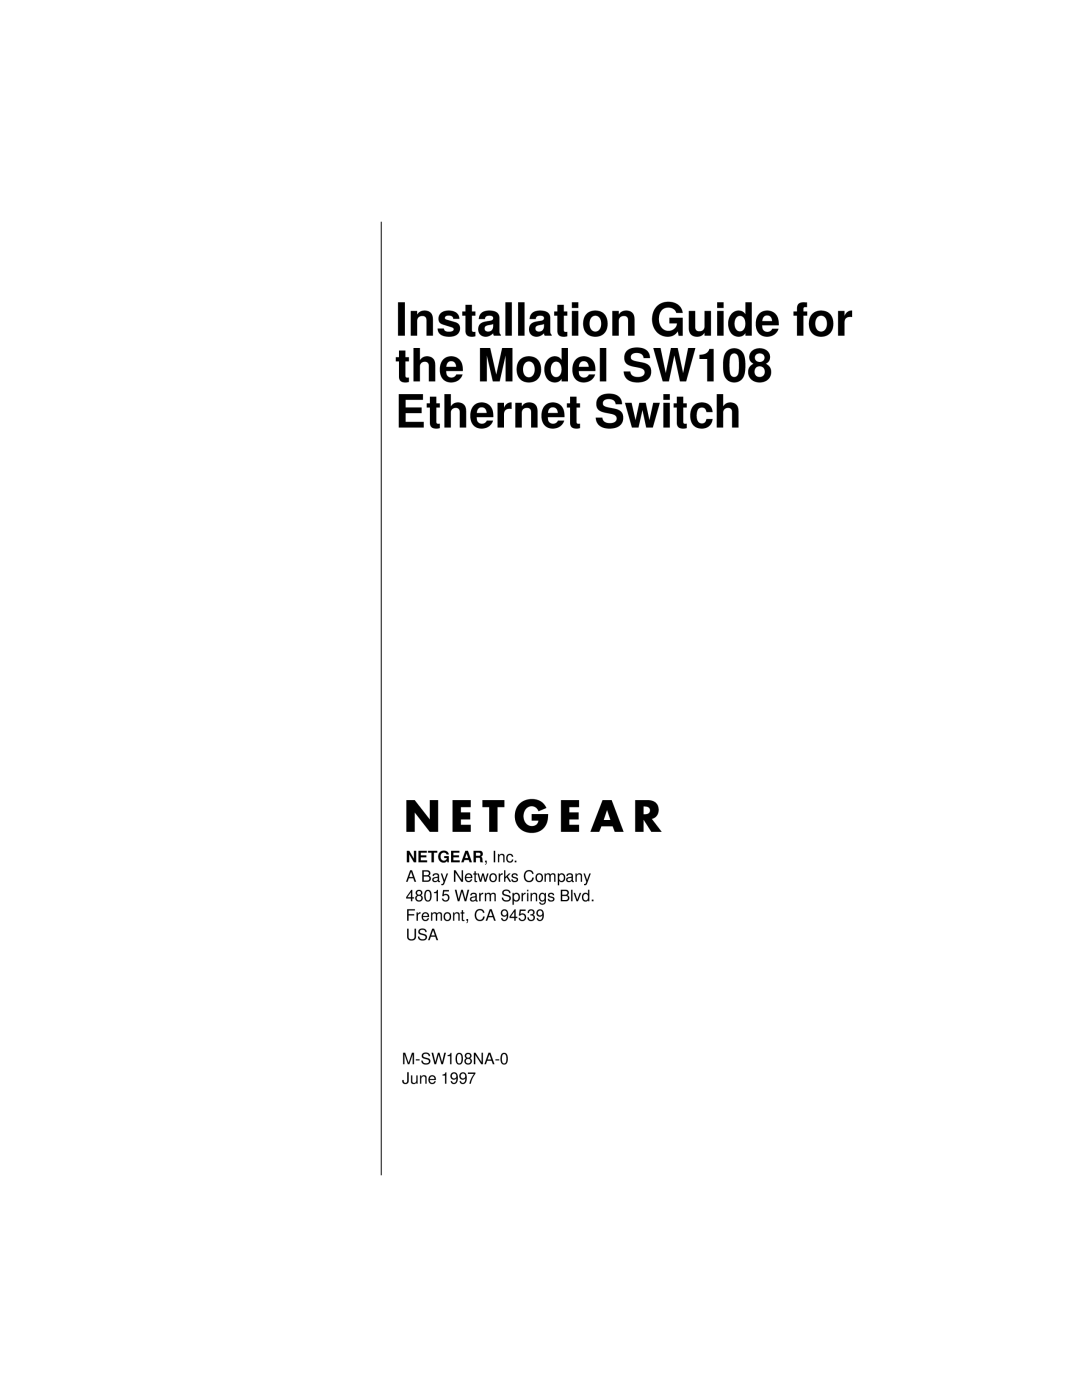 NETGEAR manual Installation Guide for the Model SW108 Ethernet Switch 